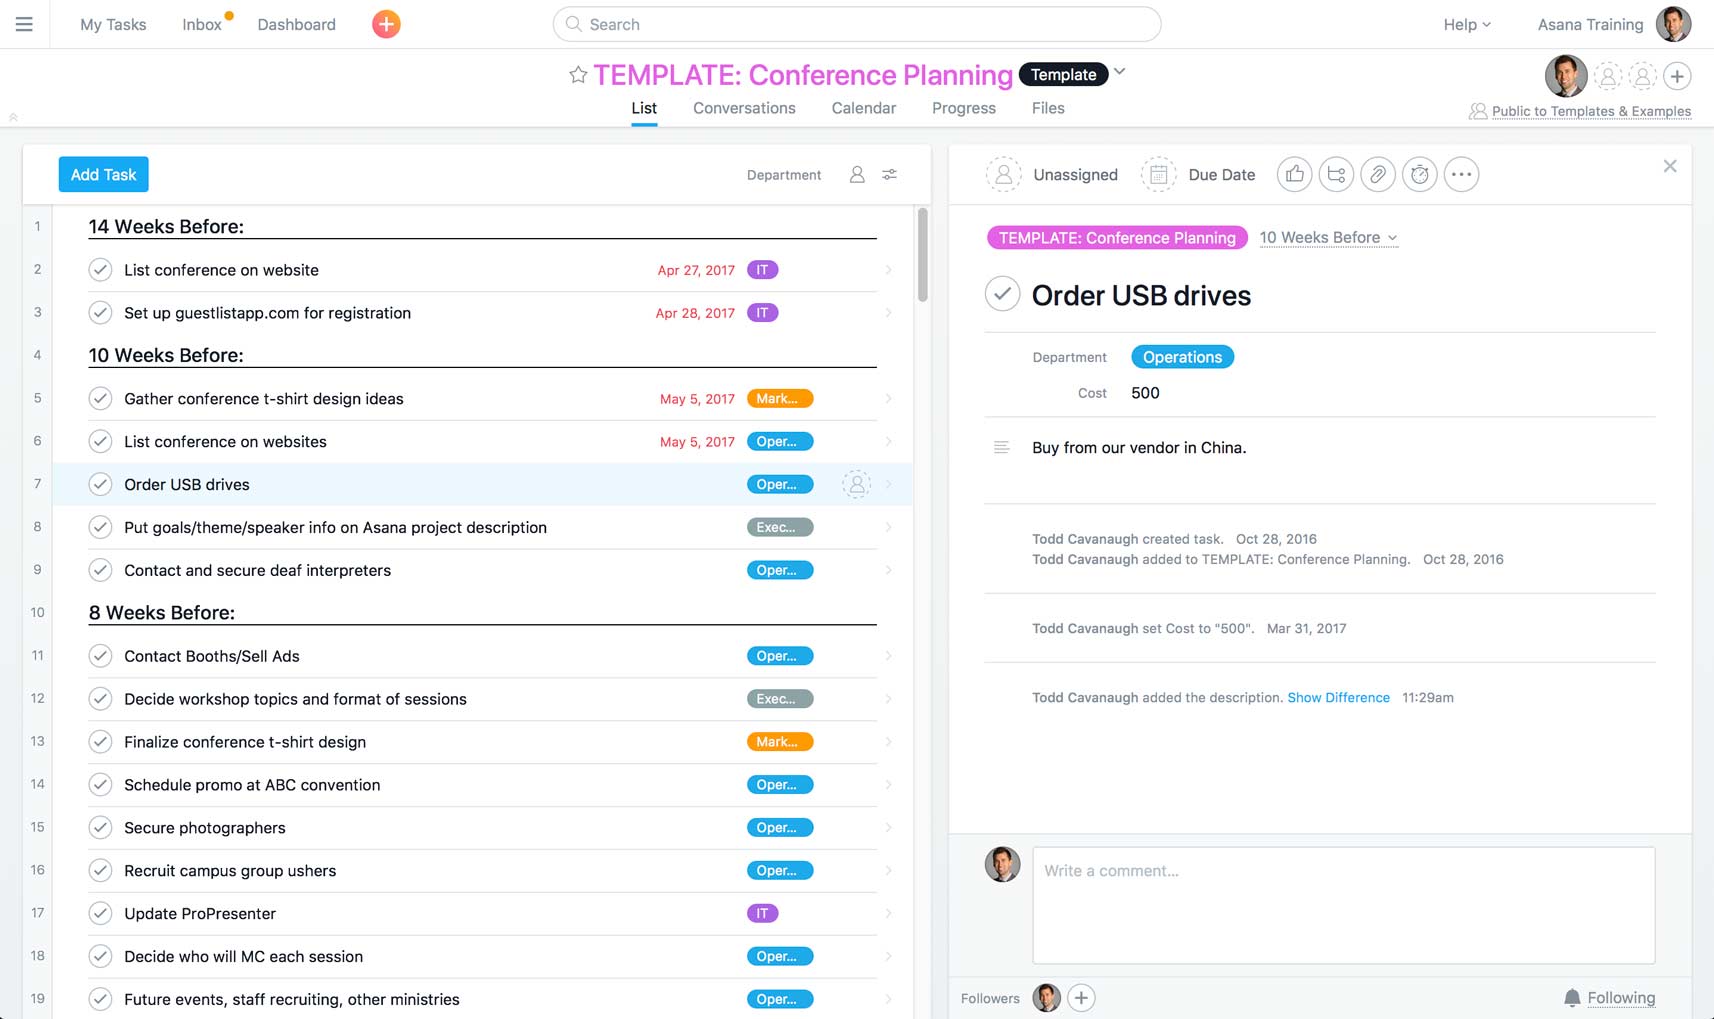 Event Planning Template in Asana